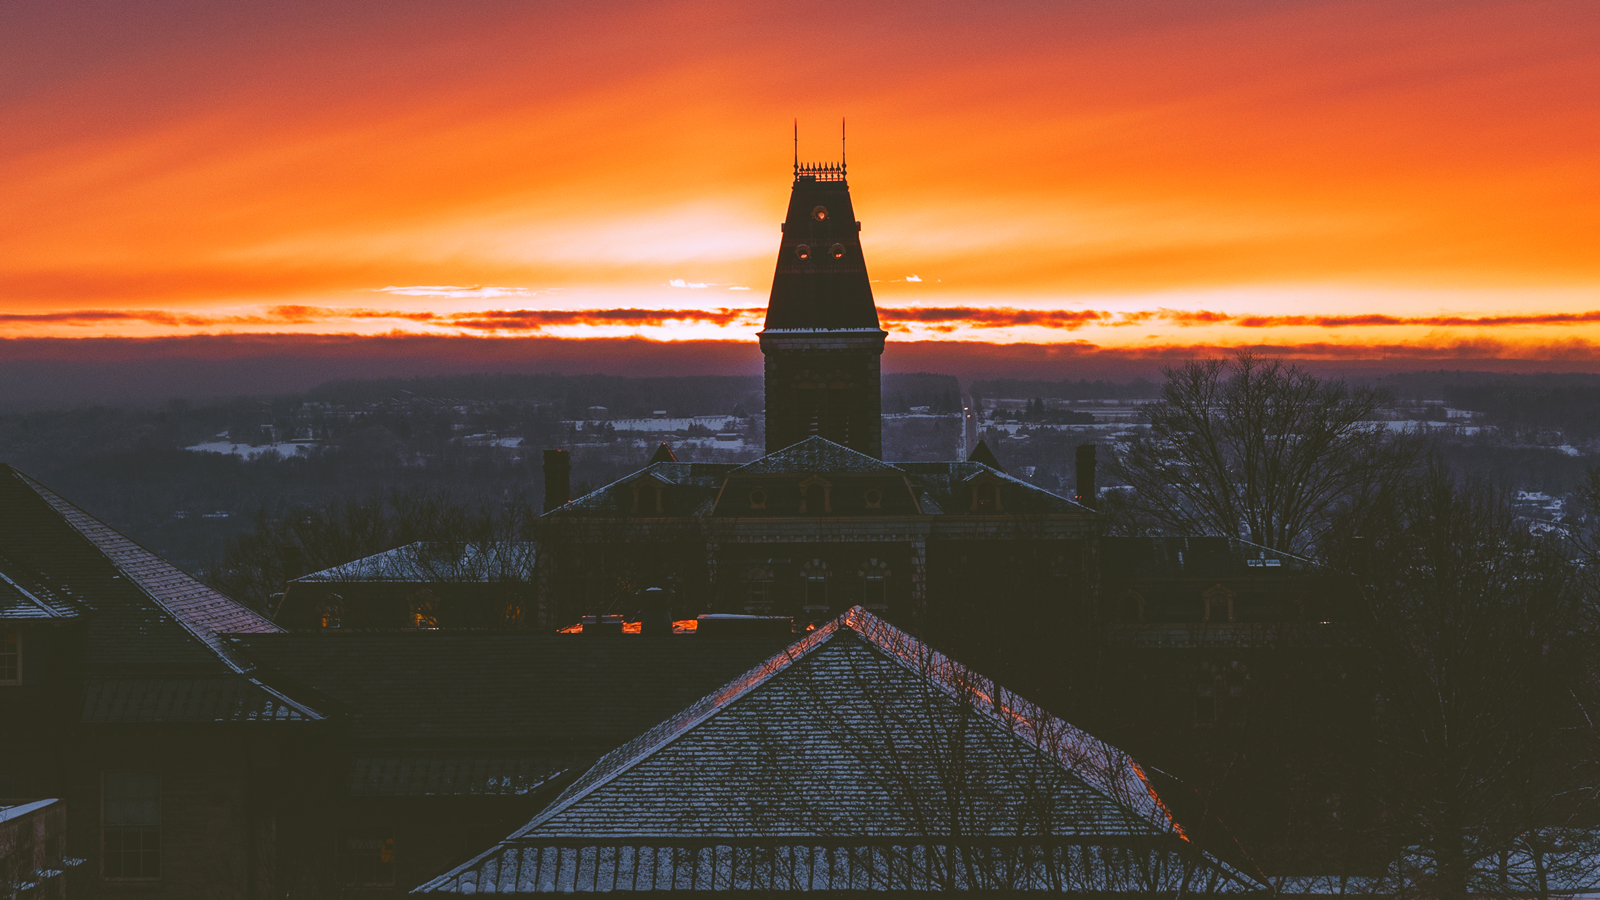 The sun rising over buildings on the Cornell campus